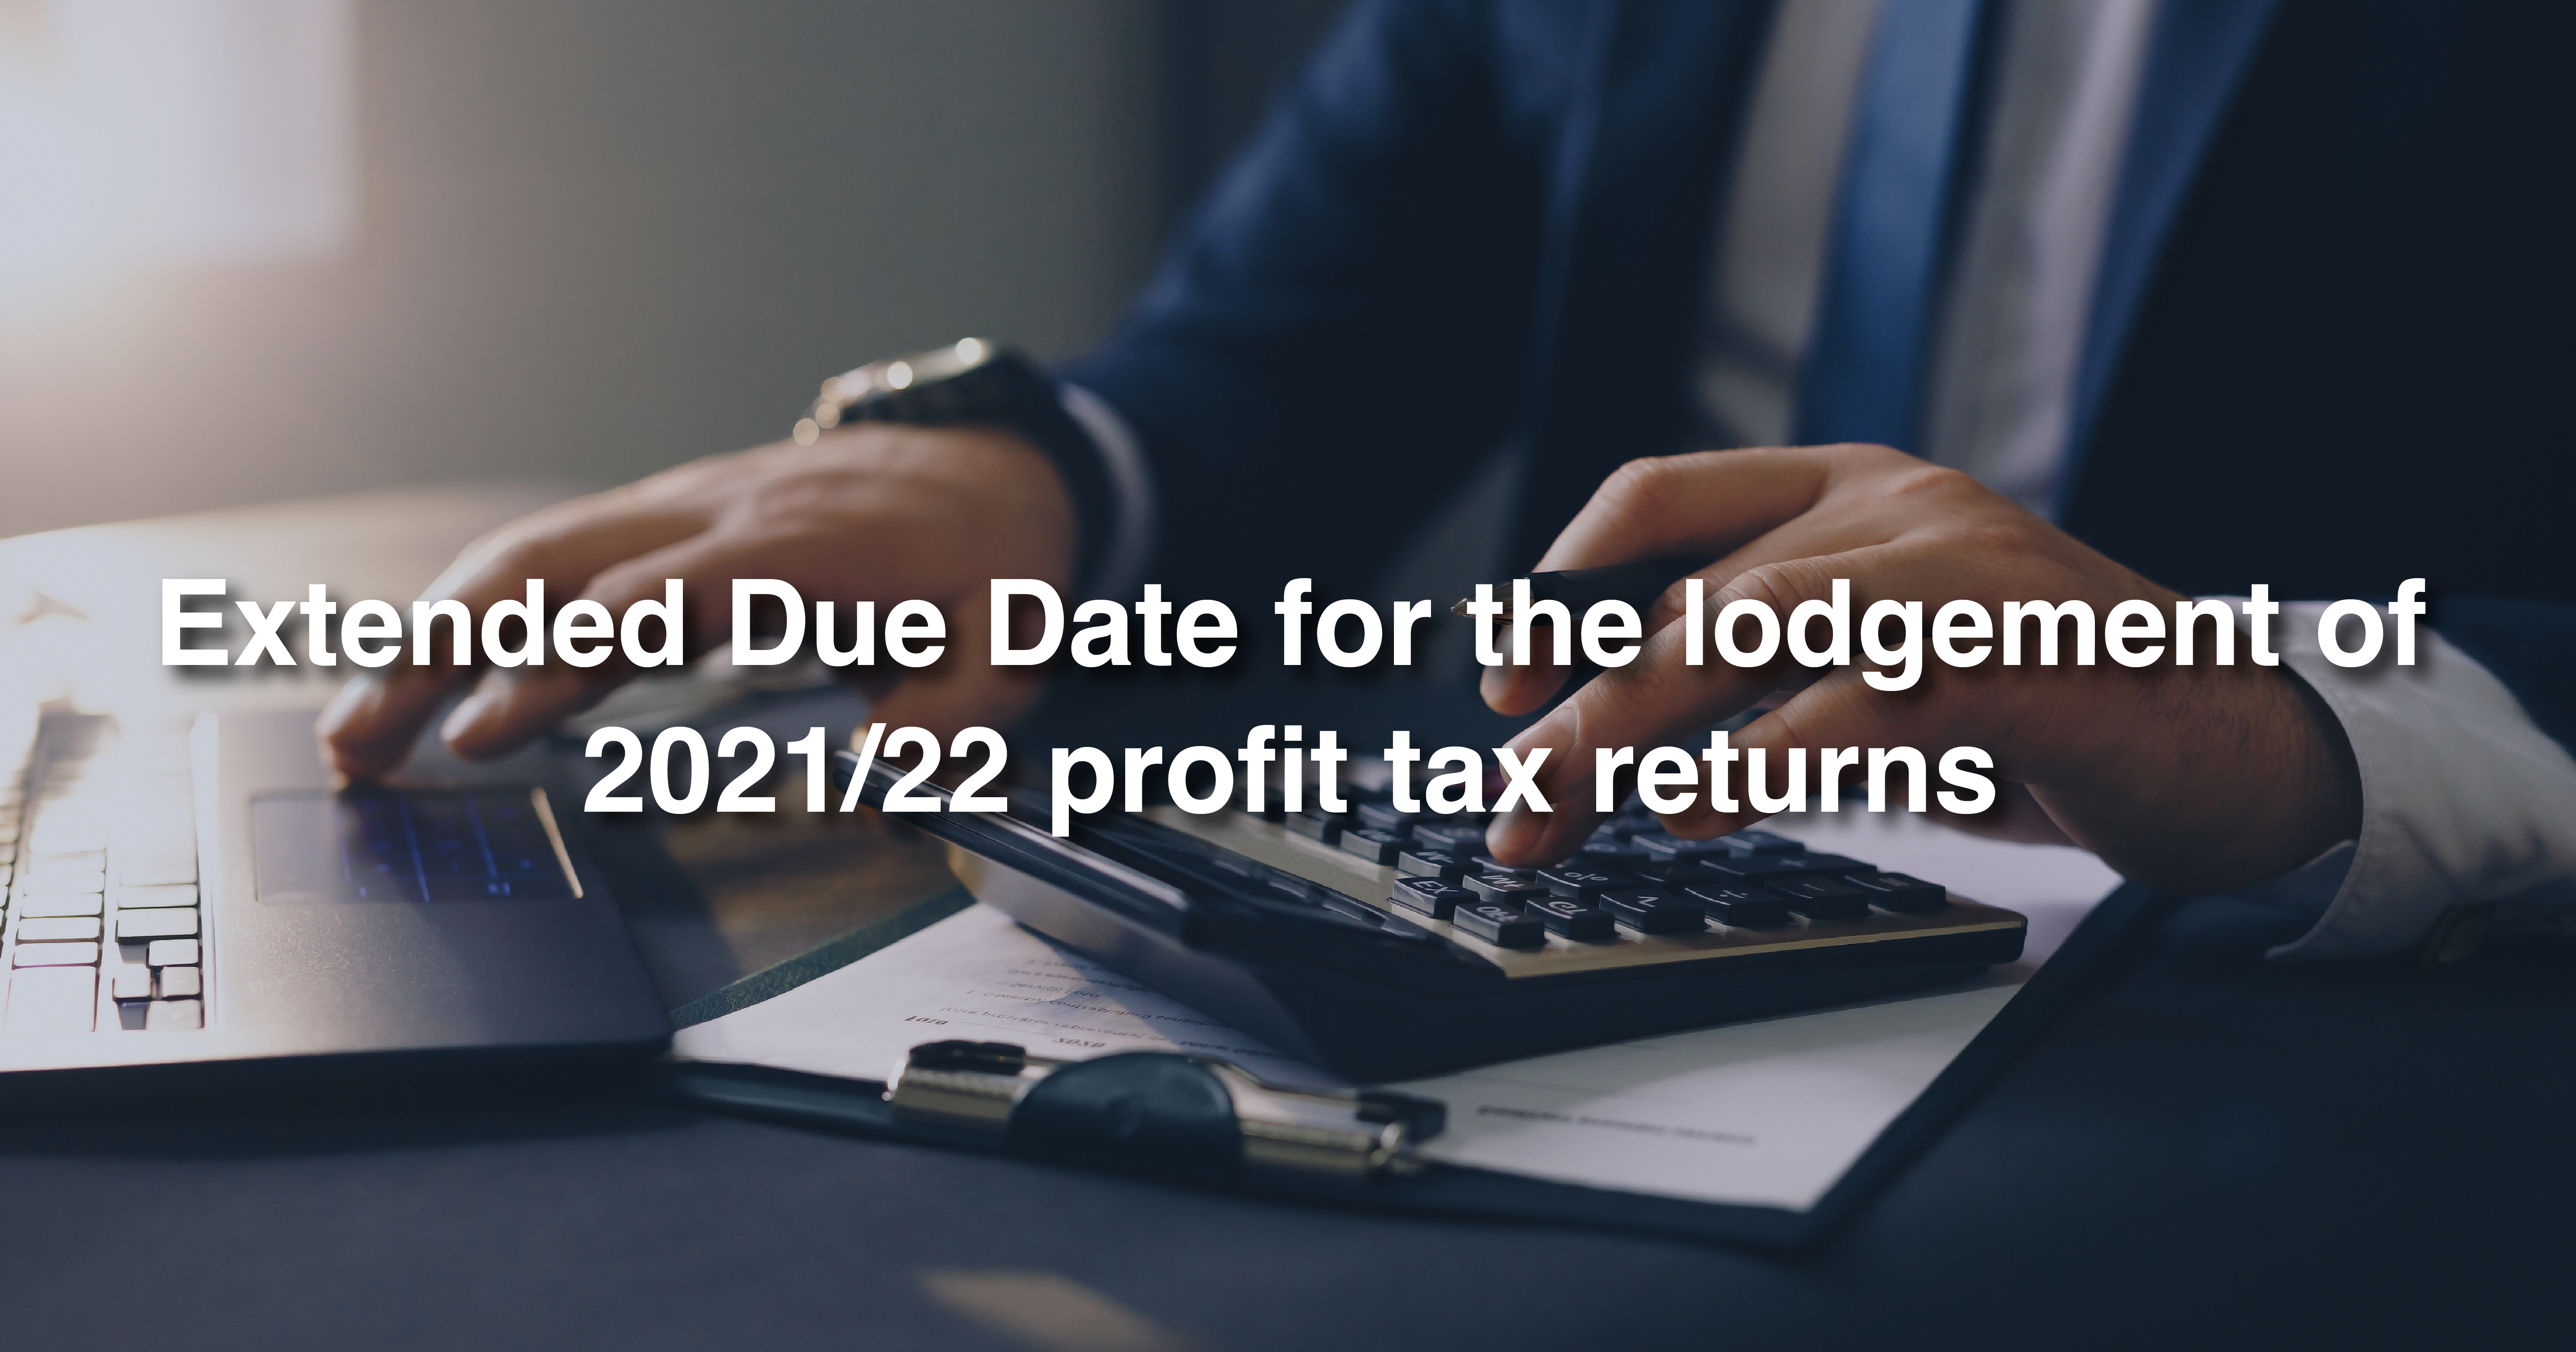 Extended Due Date for the lodgement of 2021/22 profit tax returns